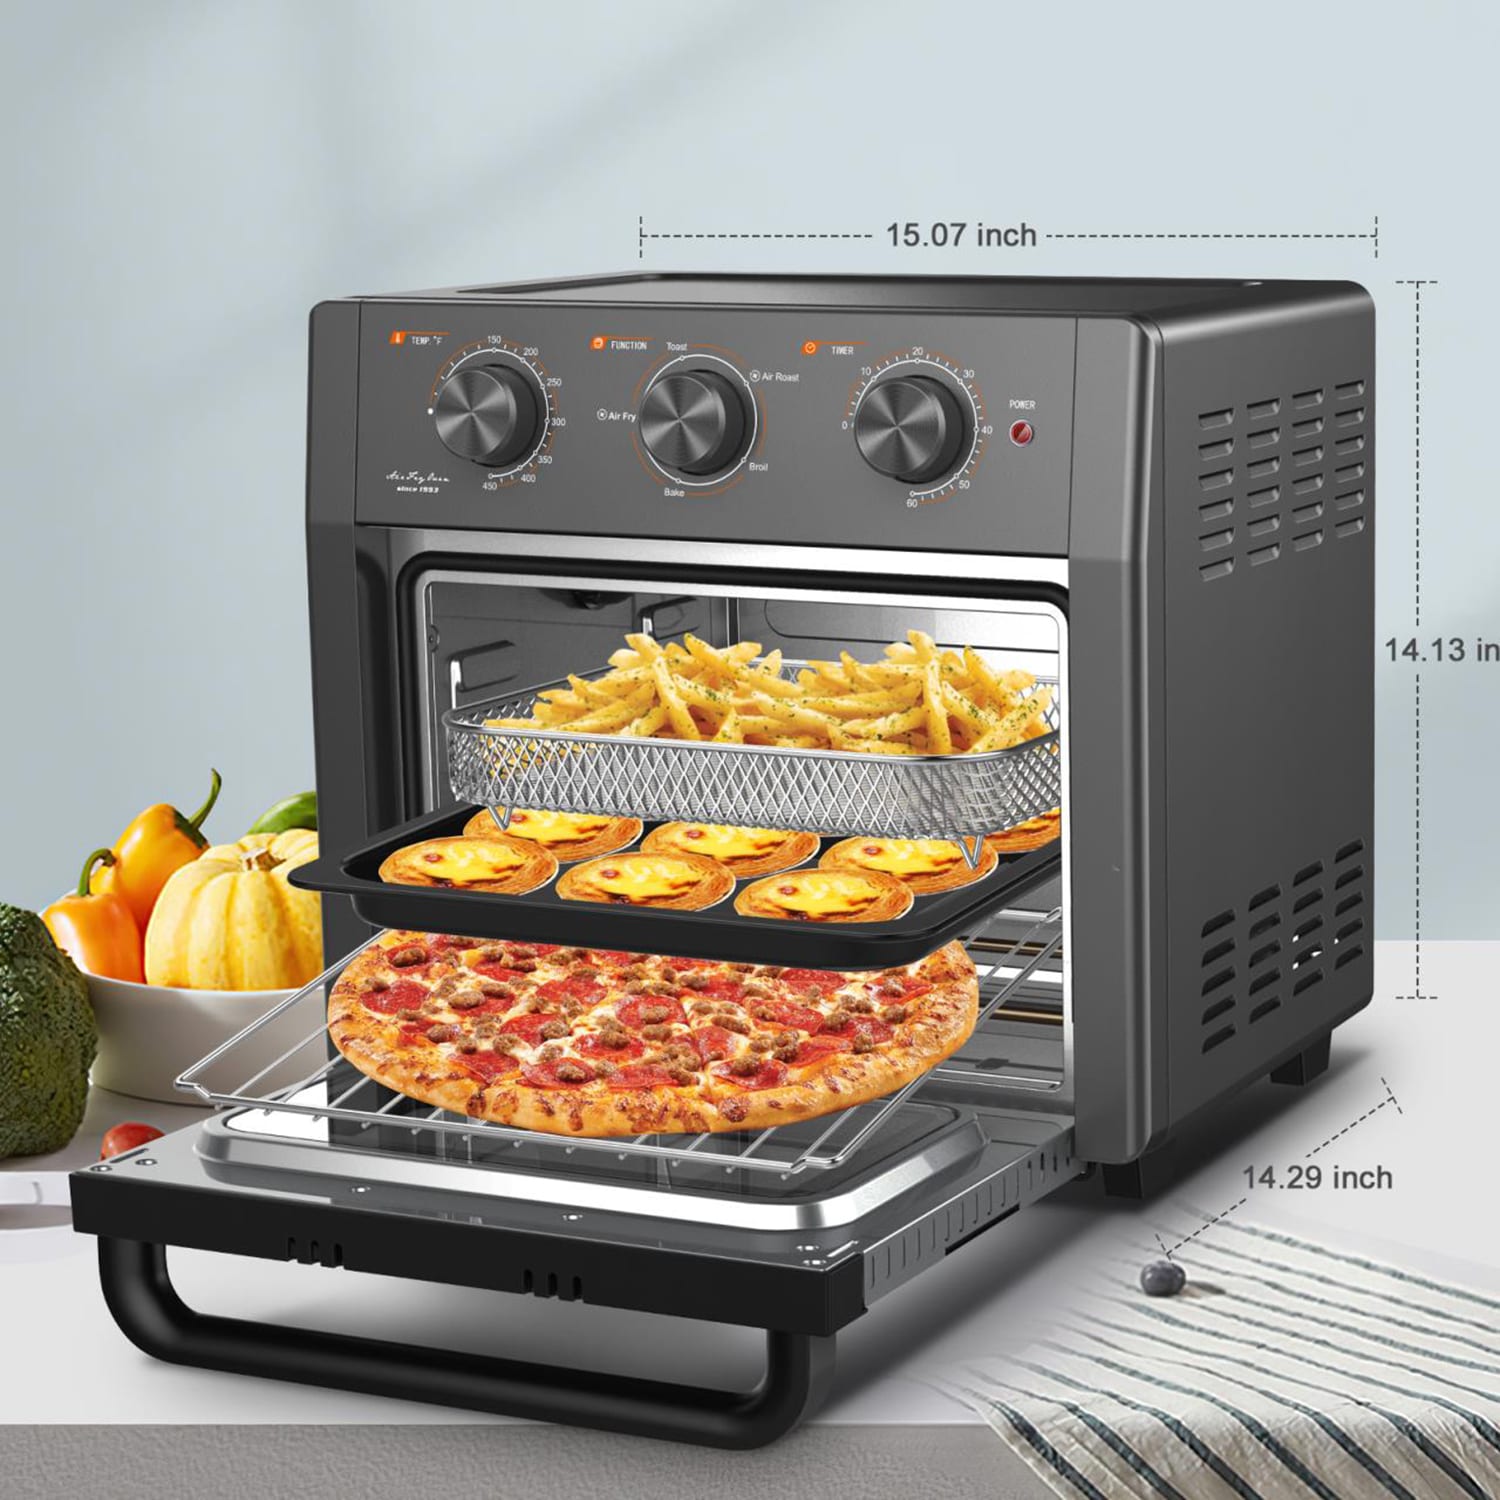 Aria 17 Quart Retro Air Fryer Oven with Accessories - Black, Nostalgic  Design, Baking, Frying, Roasting, Grilling in the Air Fryers department at